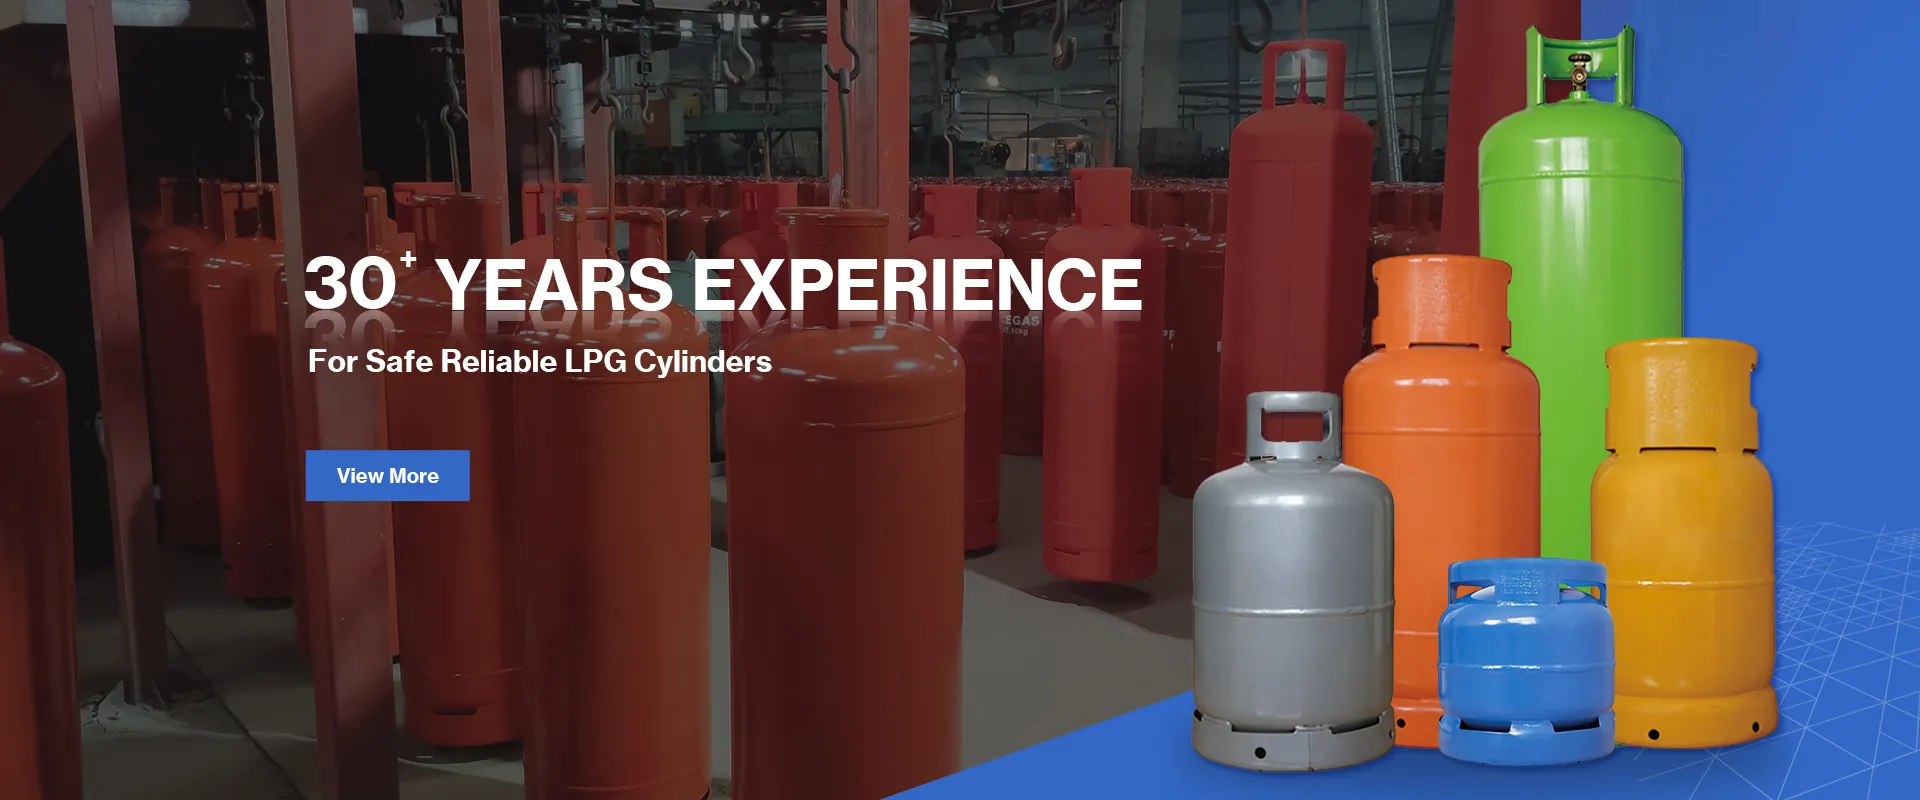 For Safe Reliable LPG Cylinders